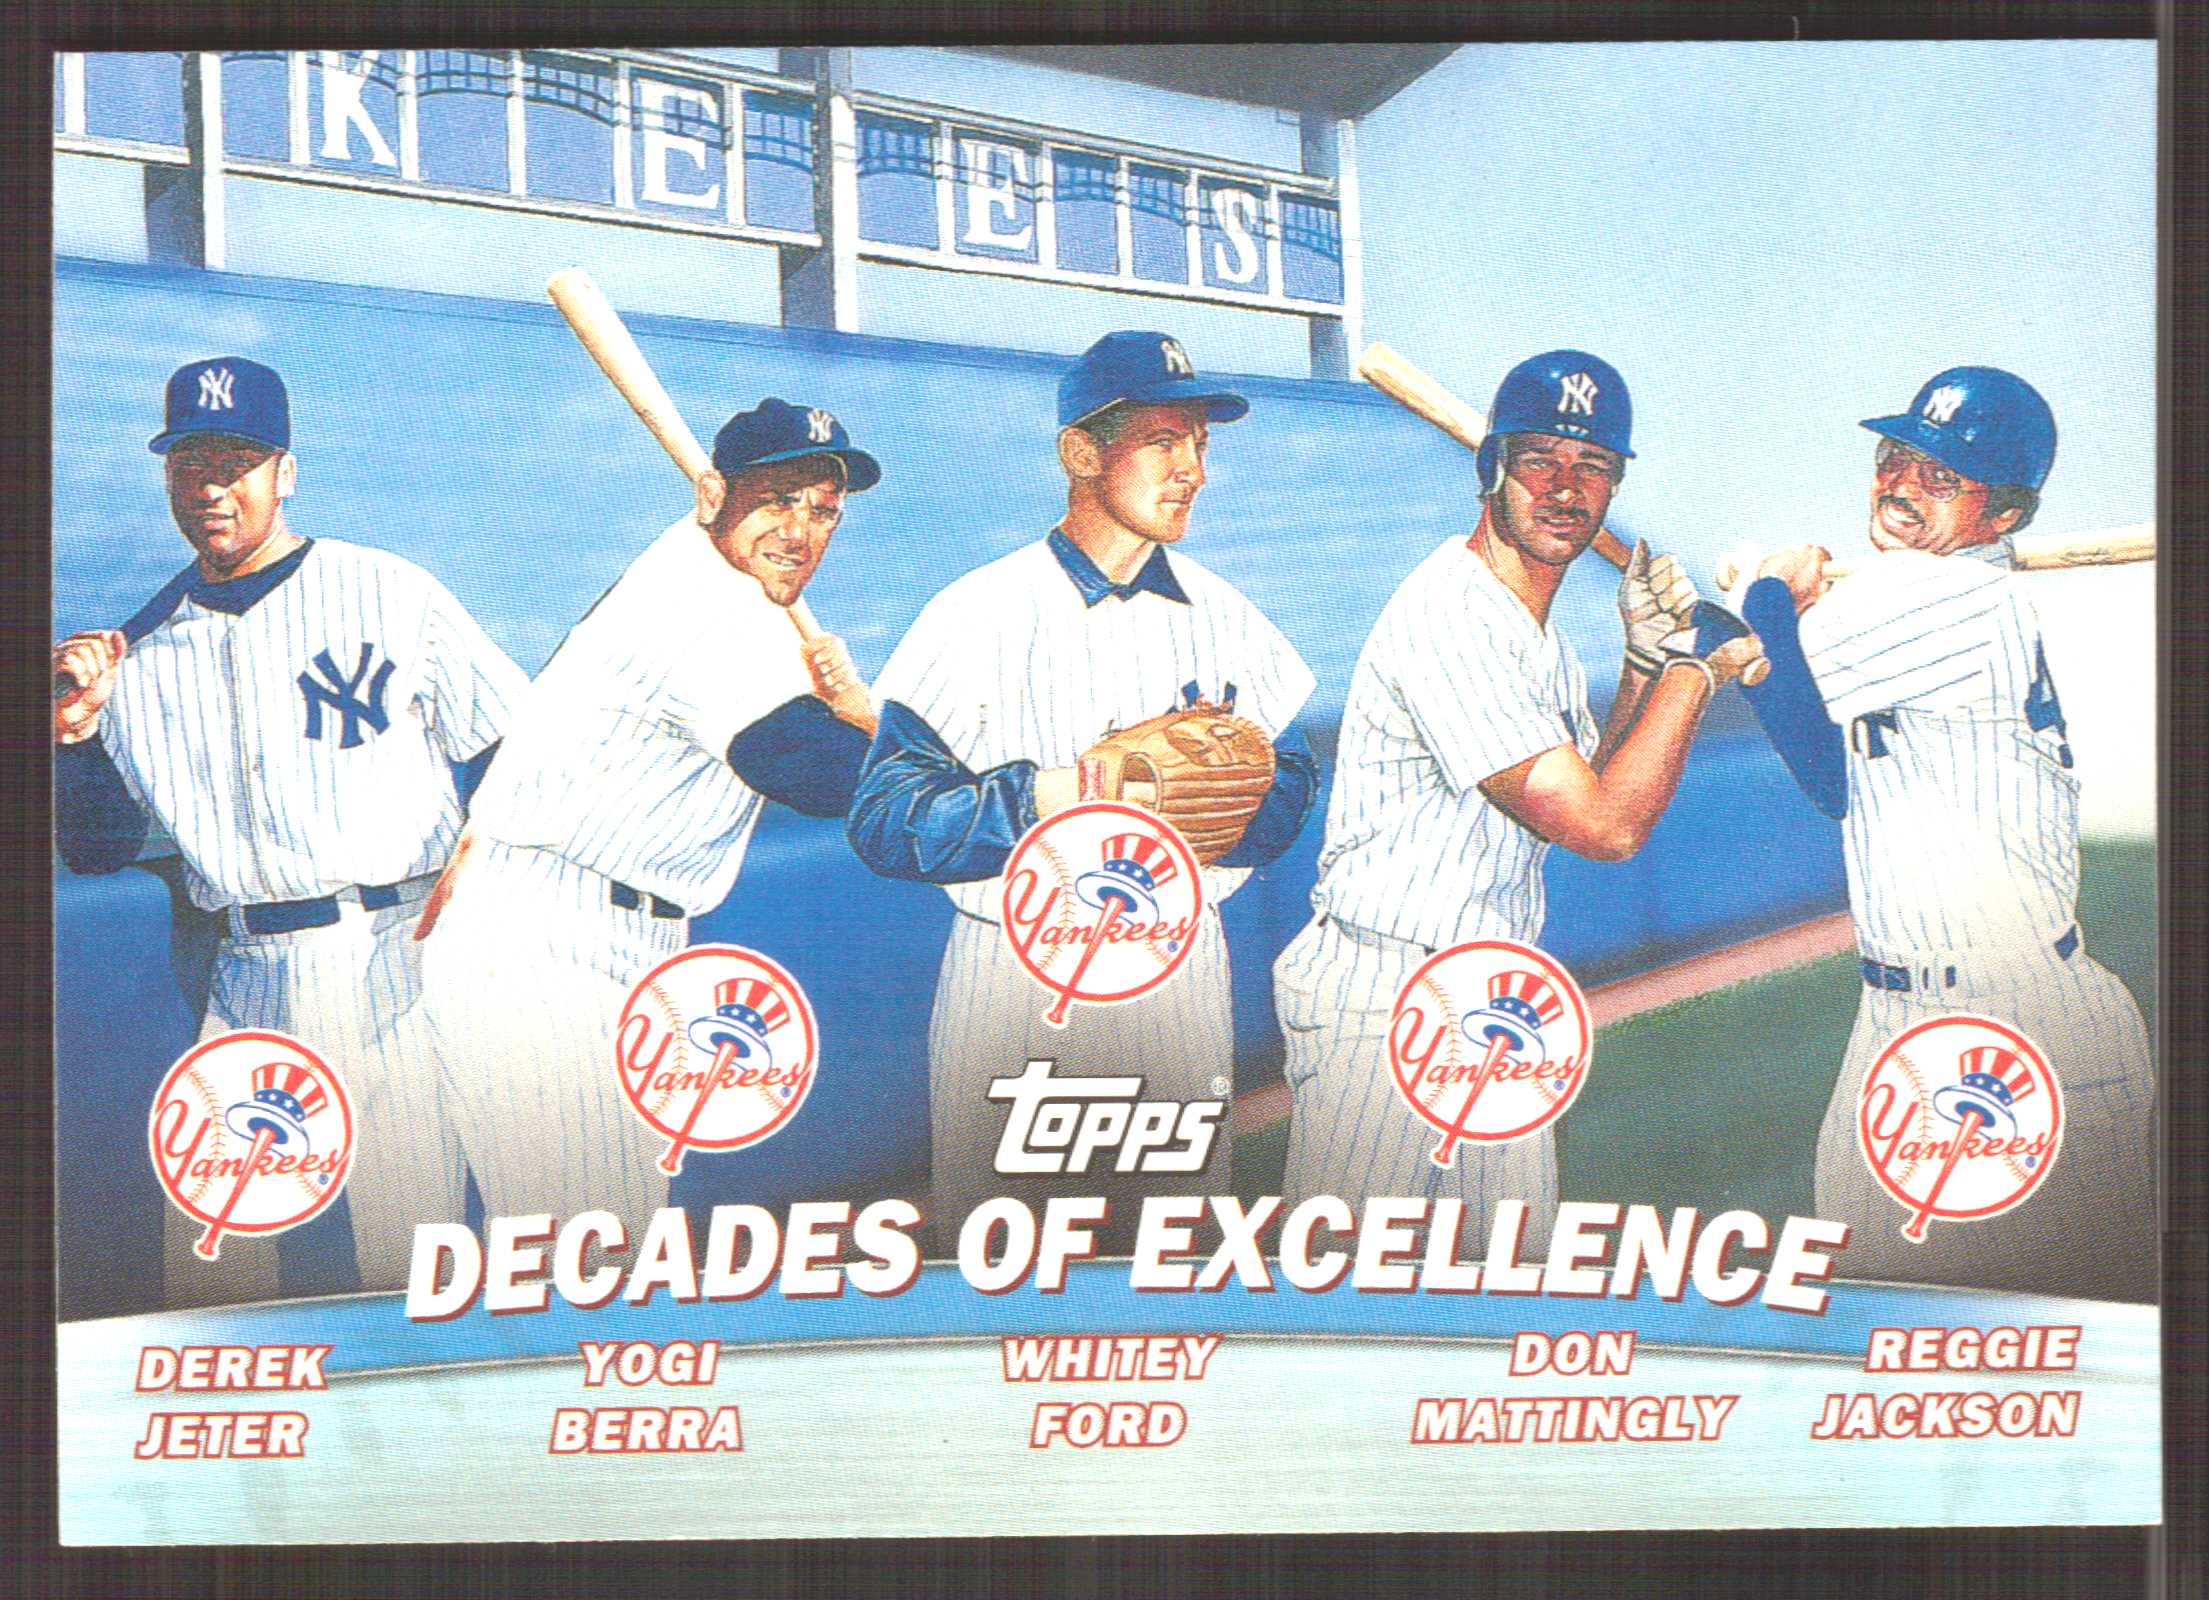 2001 Topps Combos #TC1 Decades of Excellence